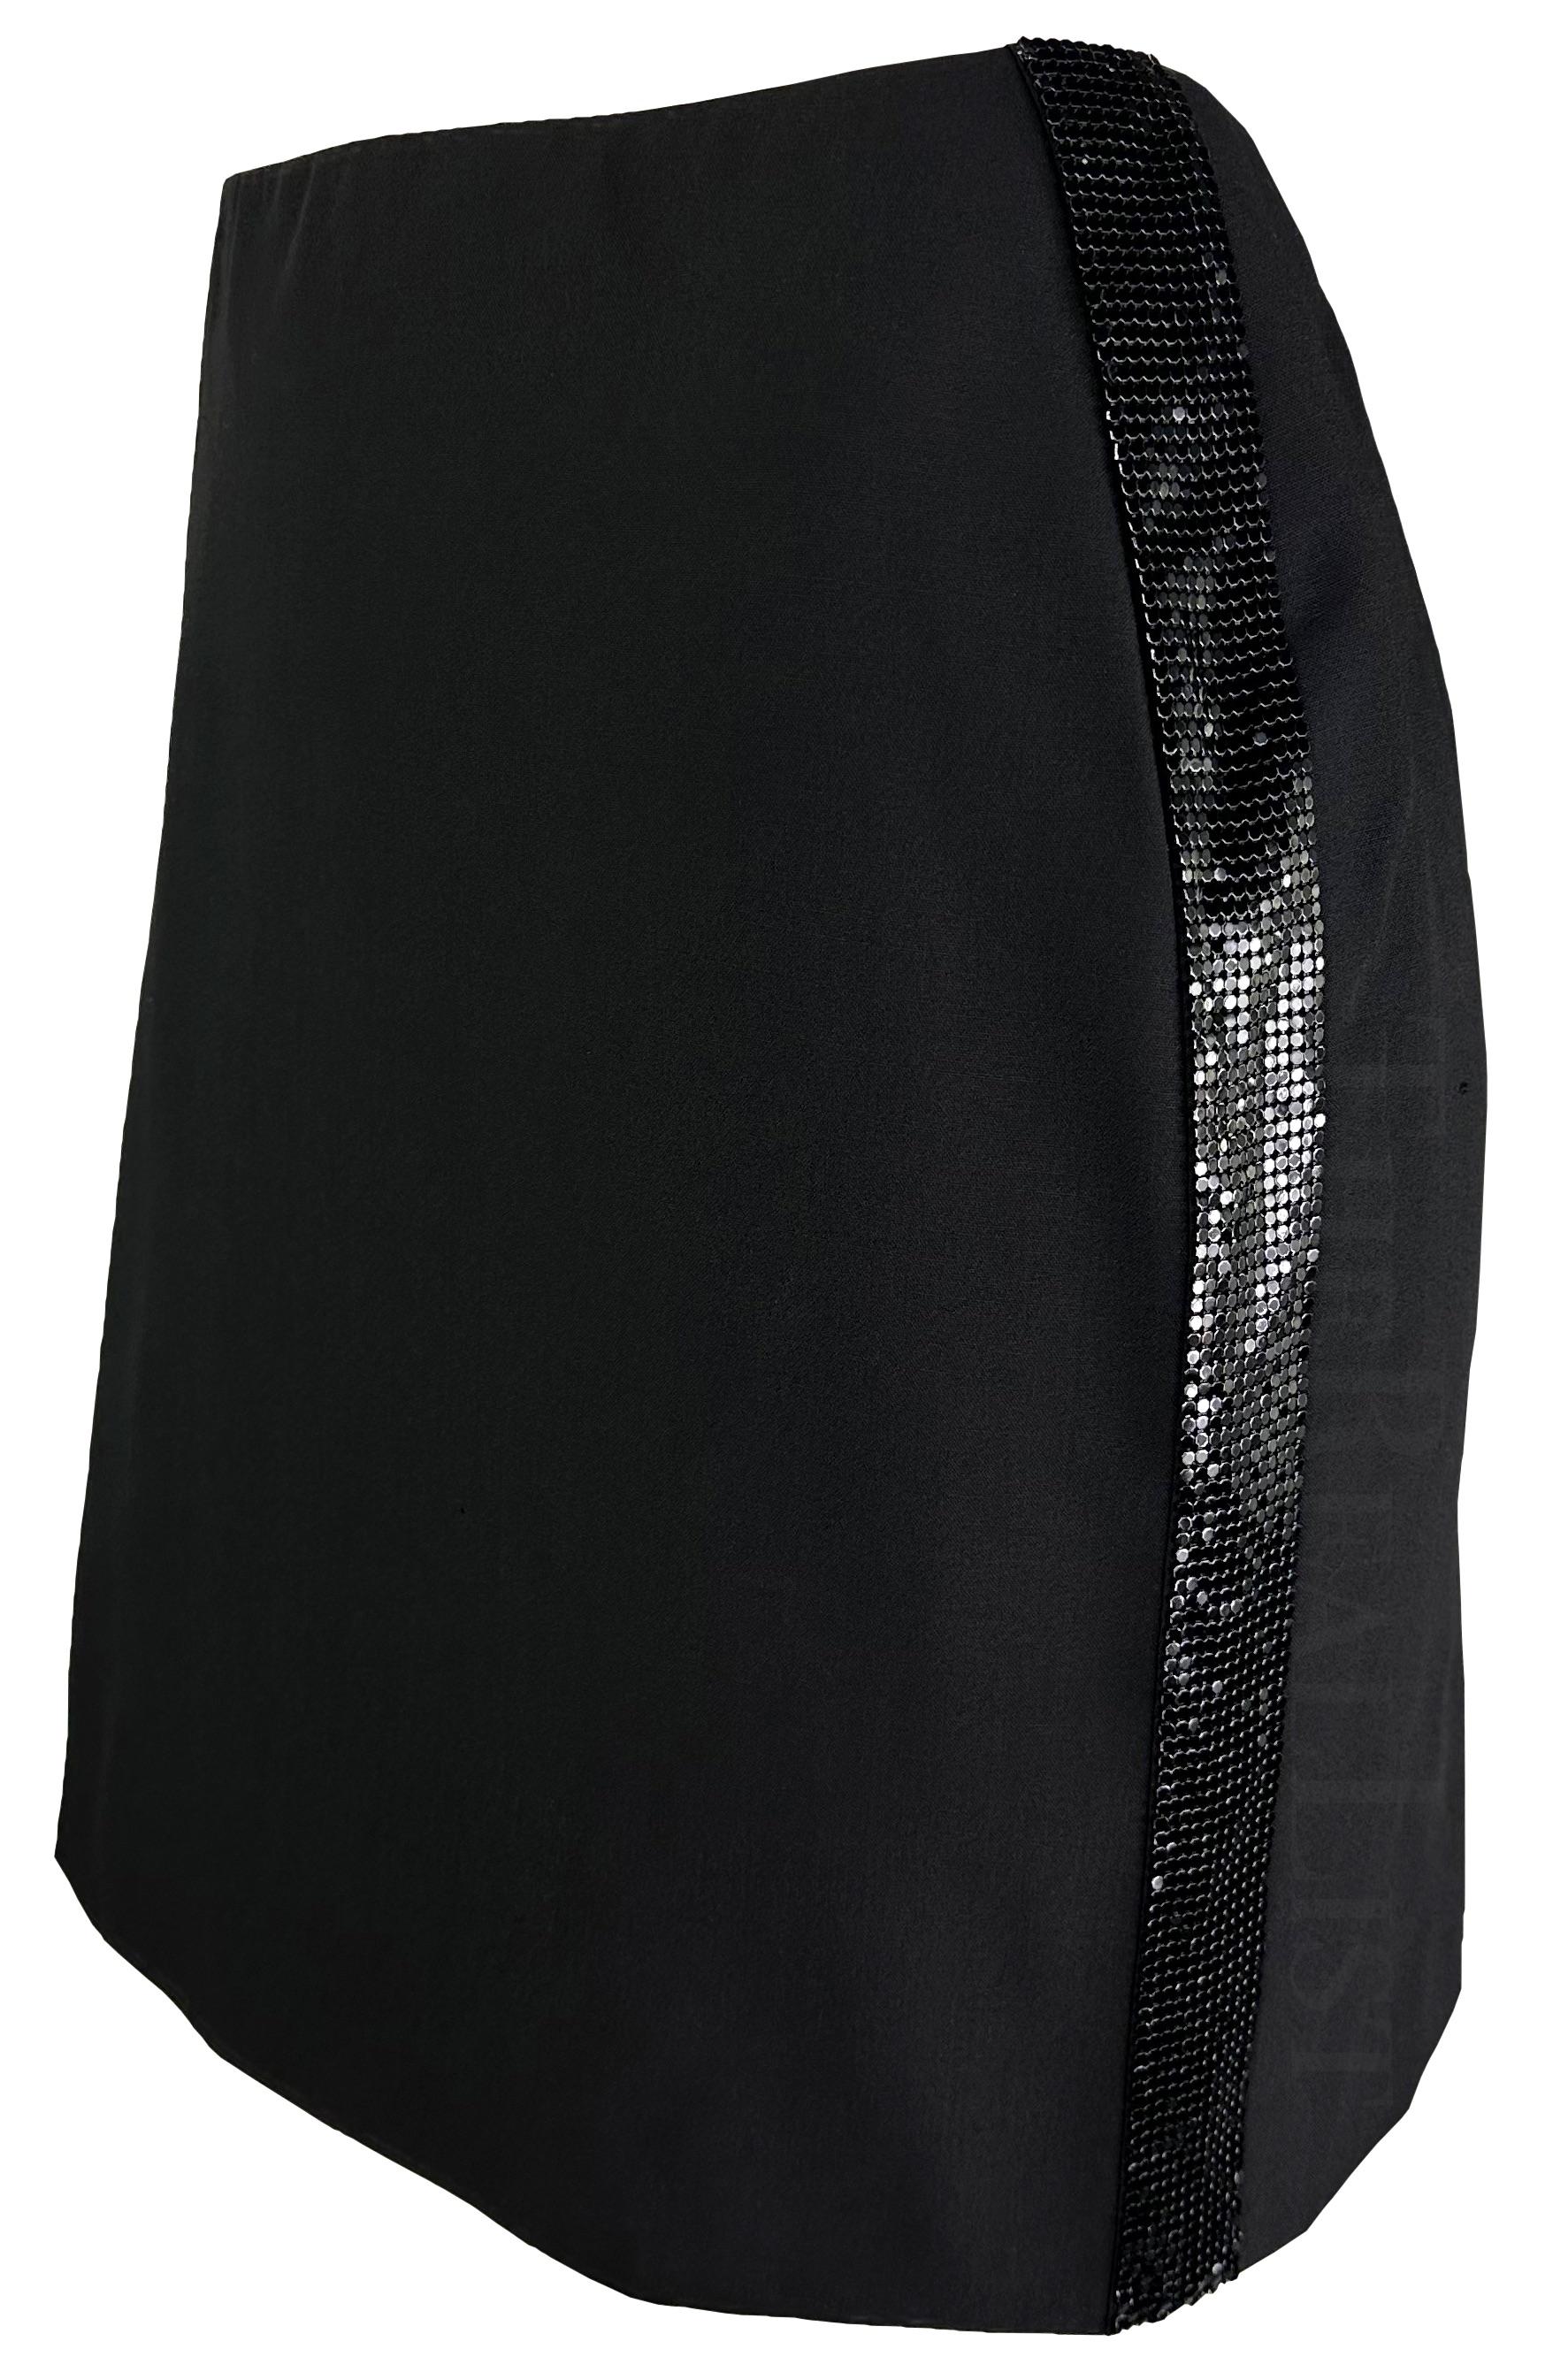 Presenting a chic black Gianni Versace mini skirt, designed by Donatella Versace. From the late 1990s / early 2000s, this skirt features the house's iconic oroton chainmail, which was patented by Gianni in 1982. The black reflective metal detail